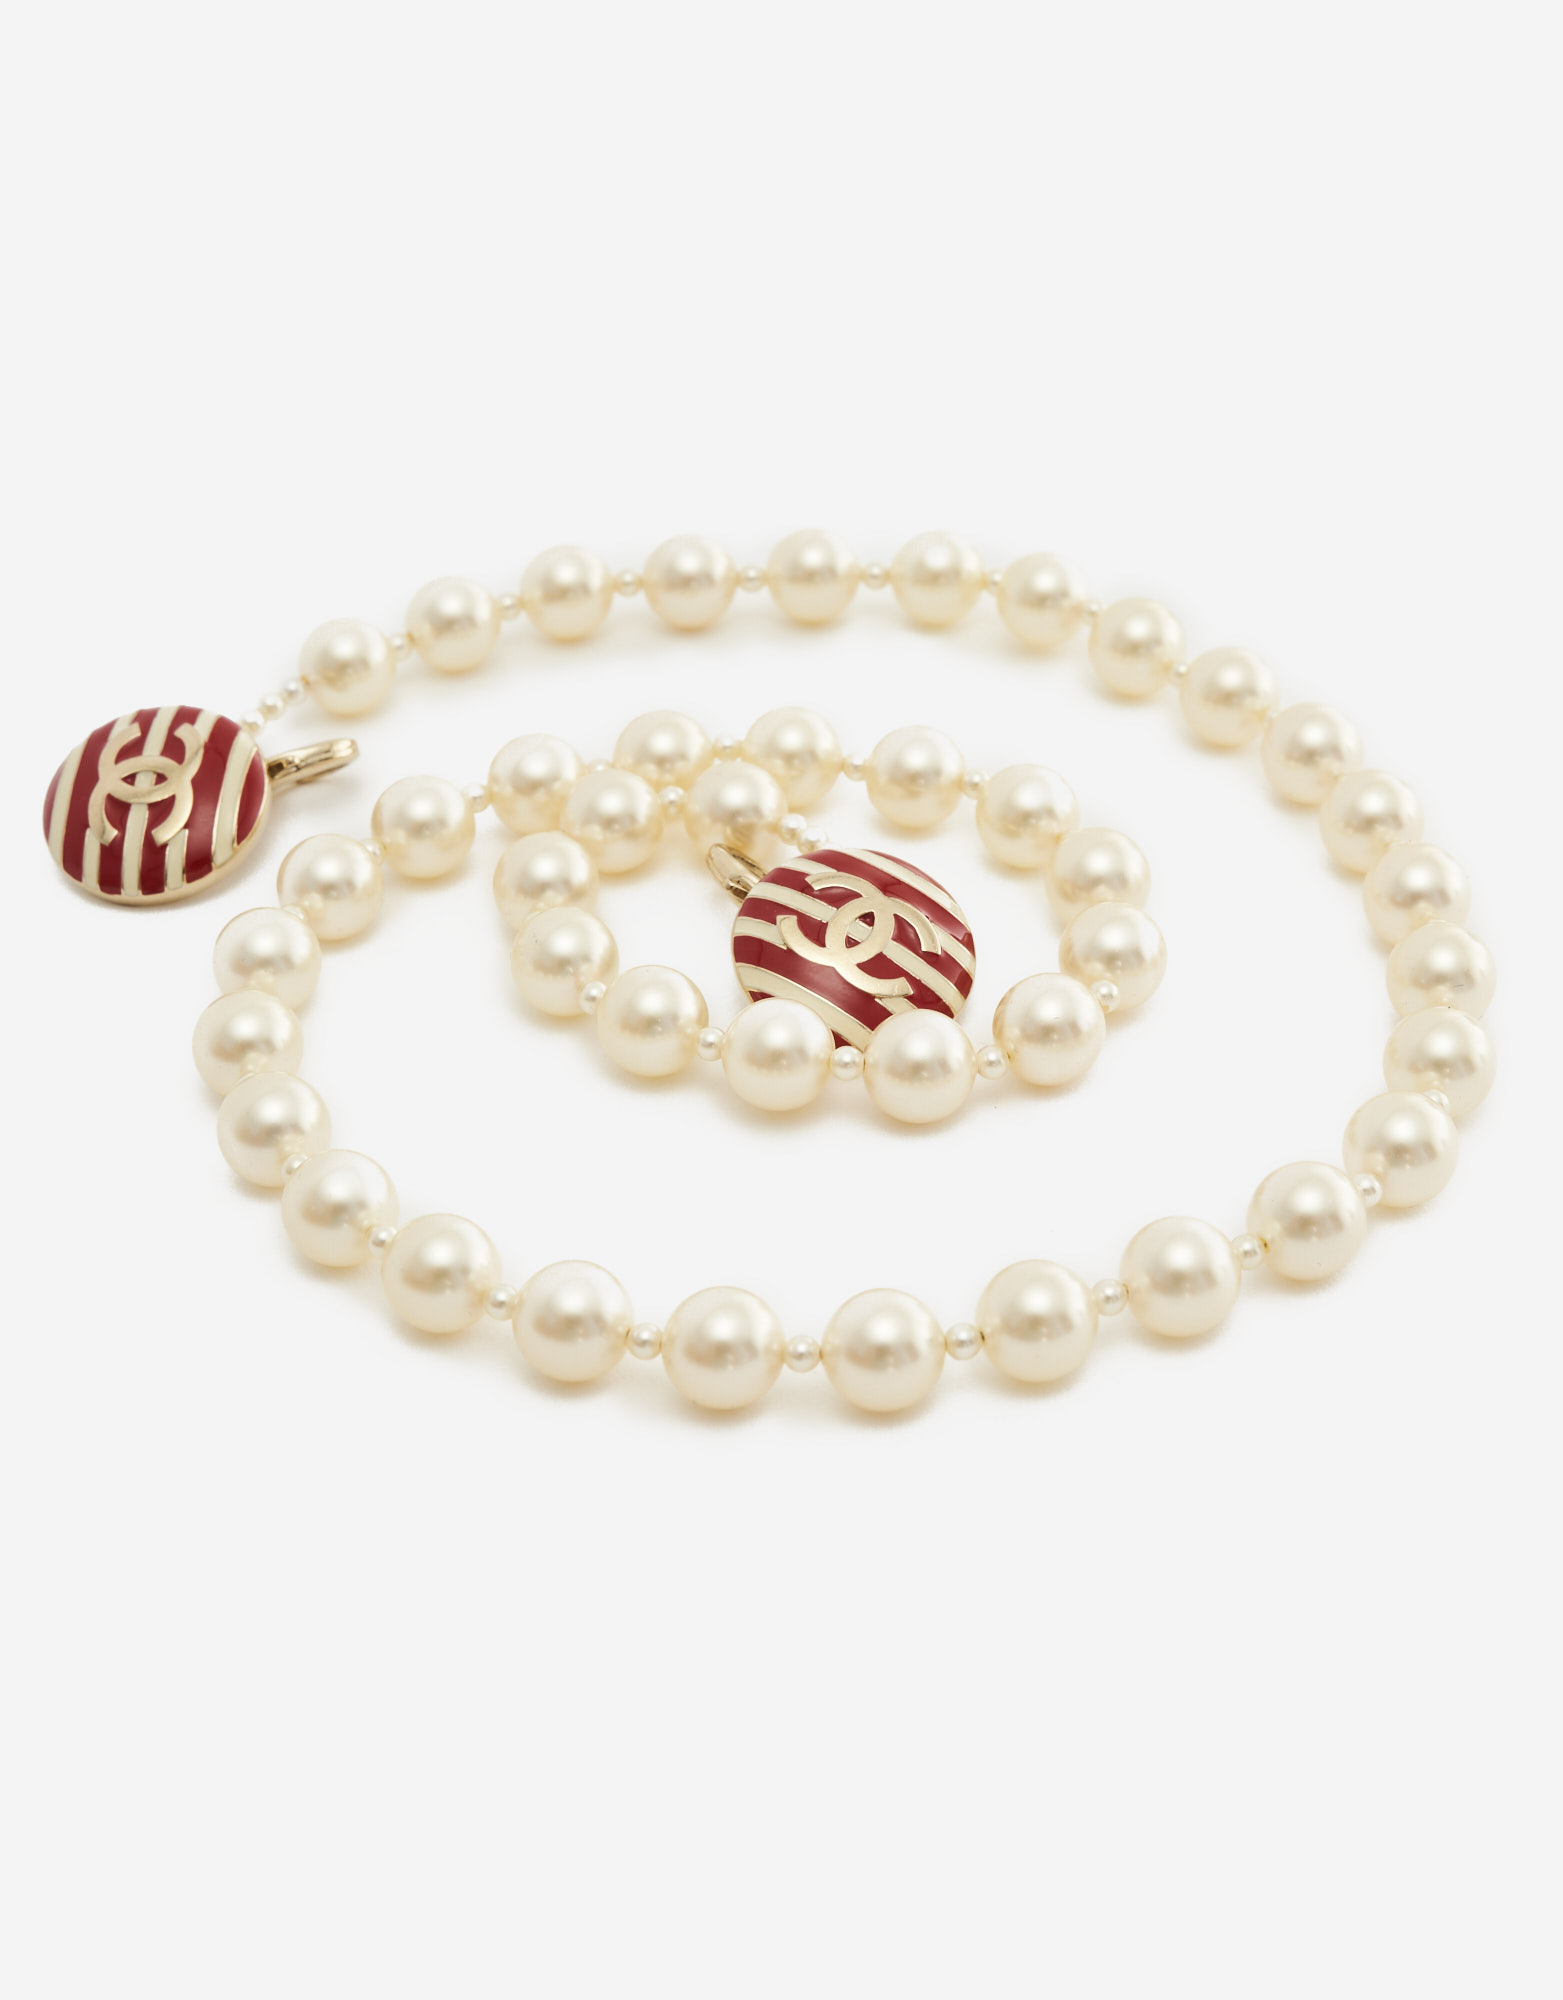 Pearl chain detail on a limited-edition Chanel Timeless Medium made from Fabric and Pearls in Red and White on SACLÀB